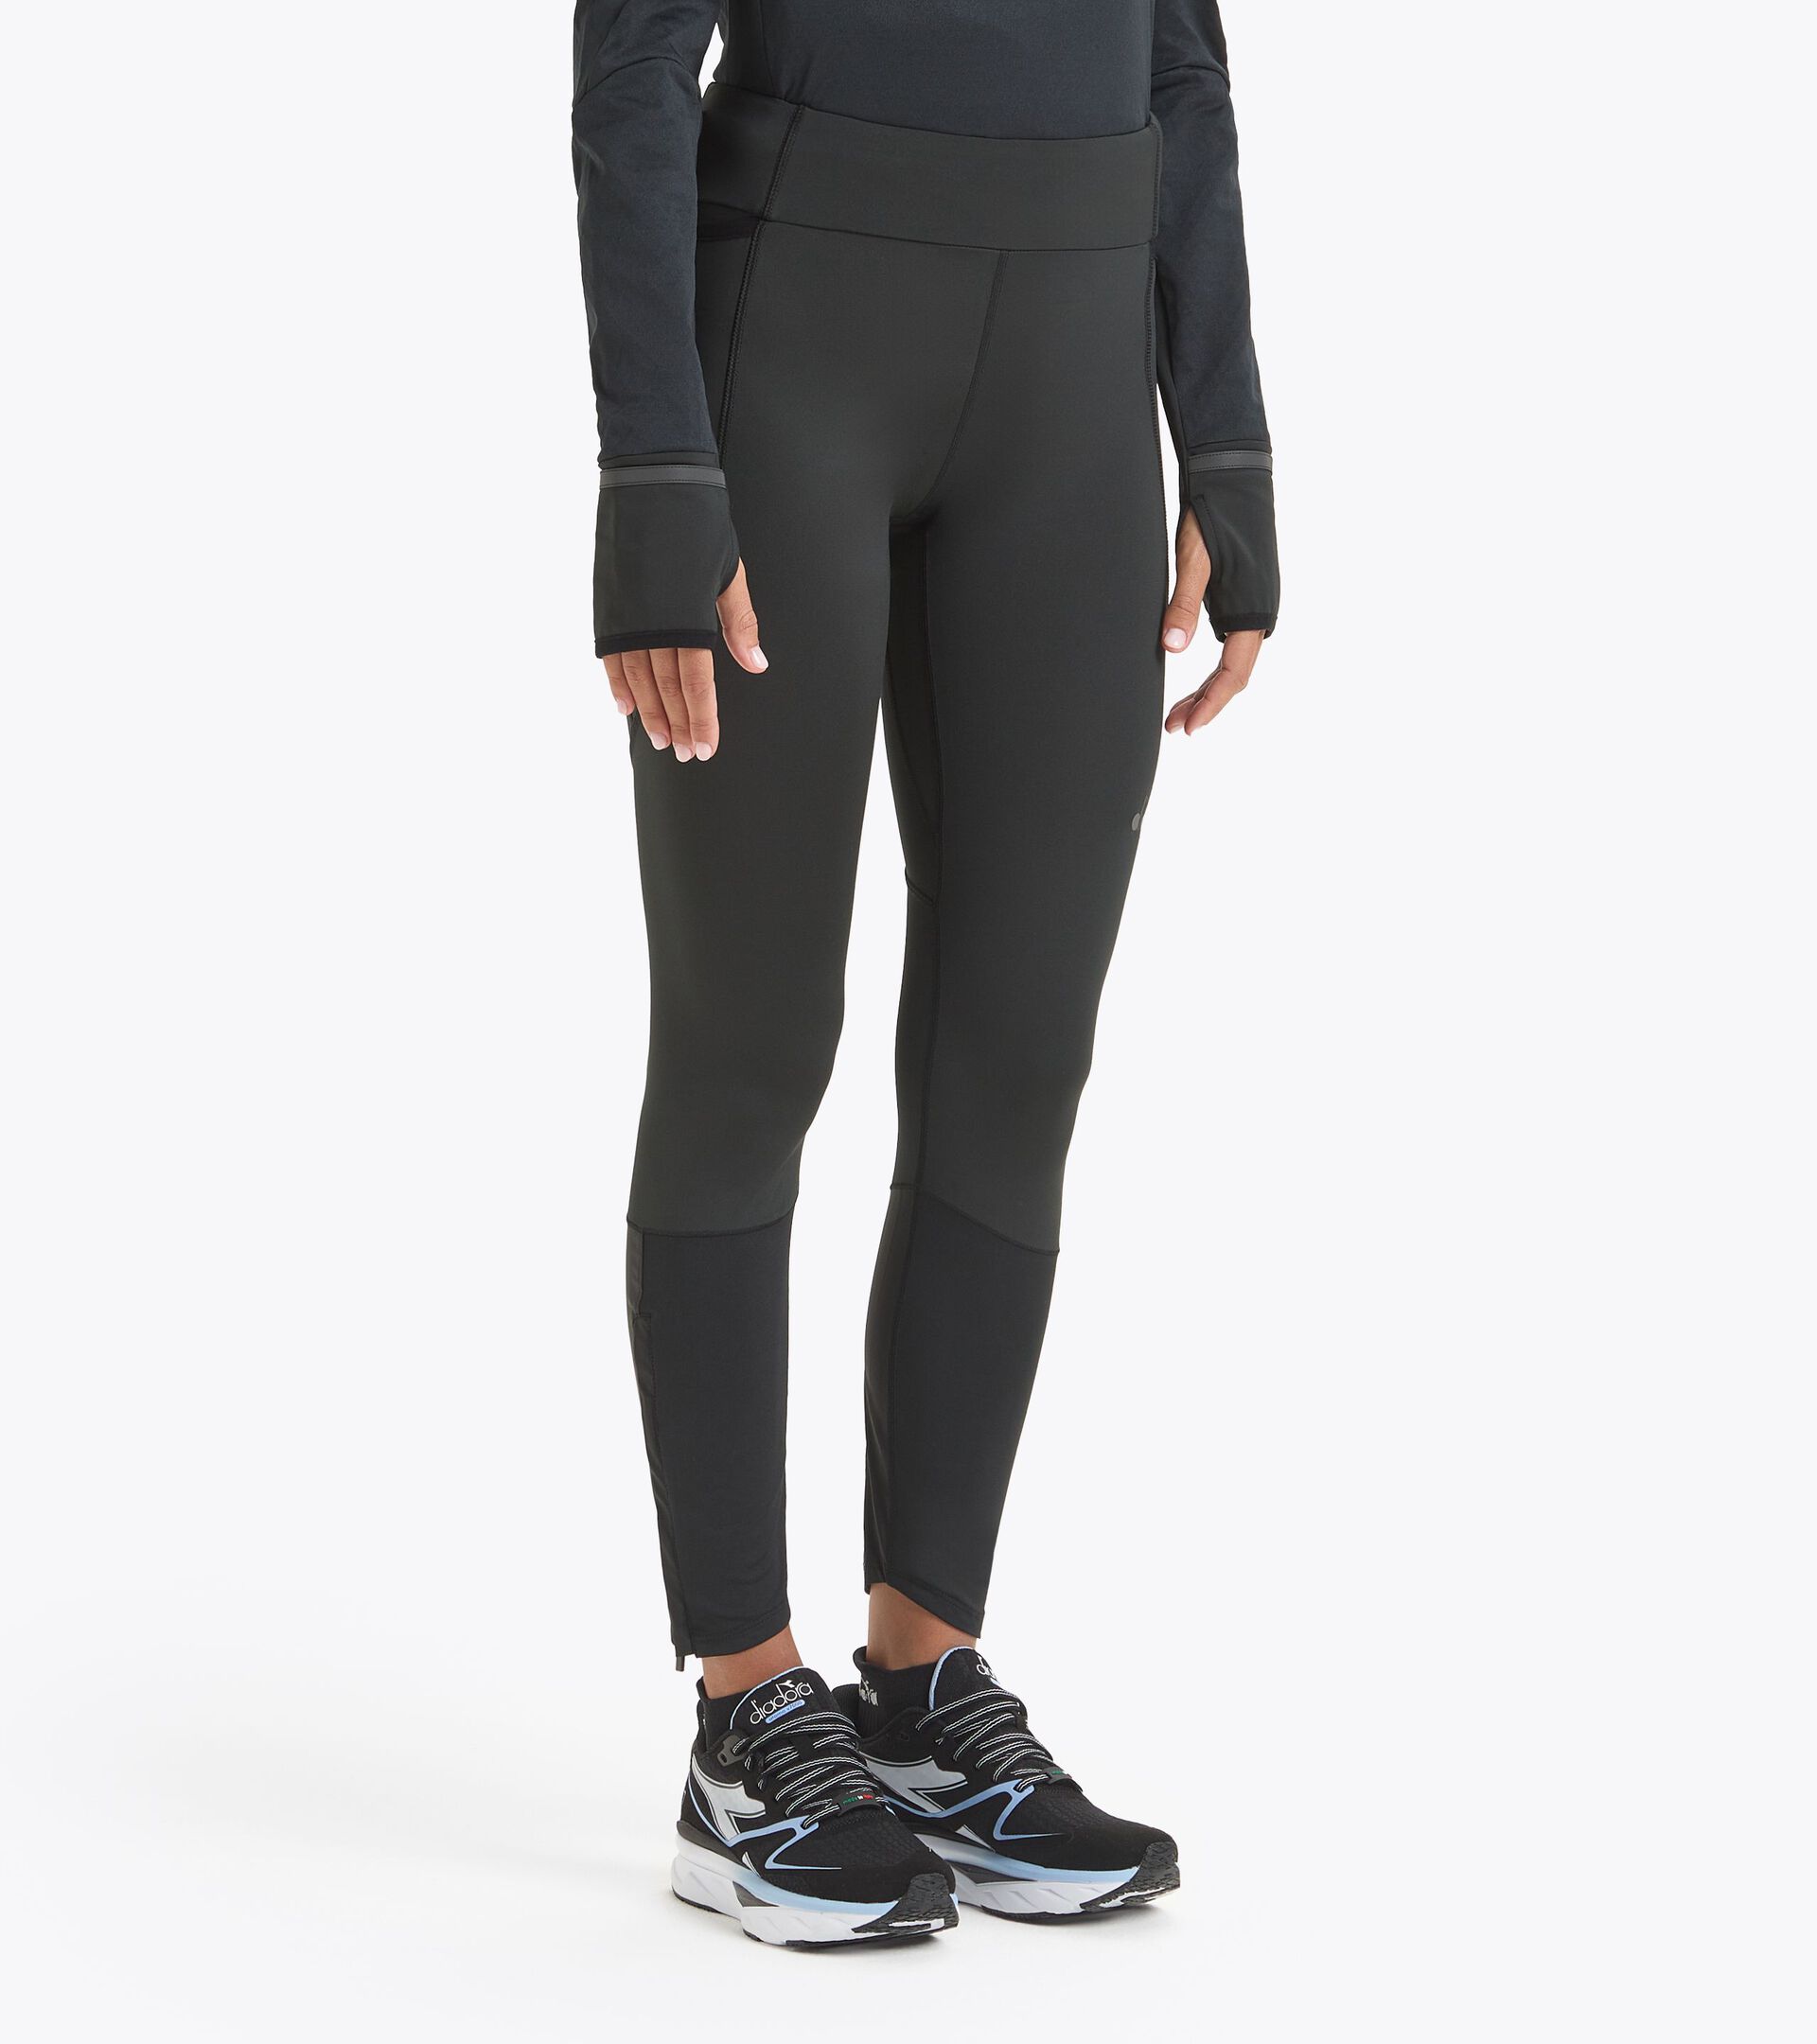 Discover winter running leggings and tights